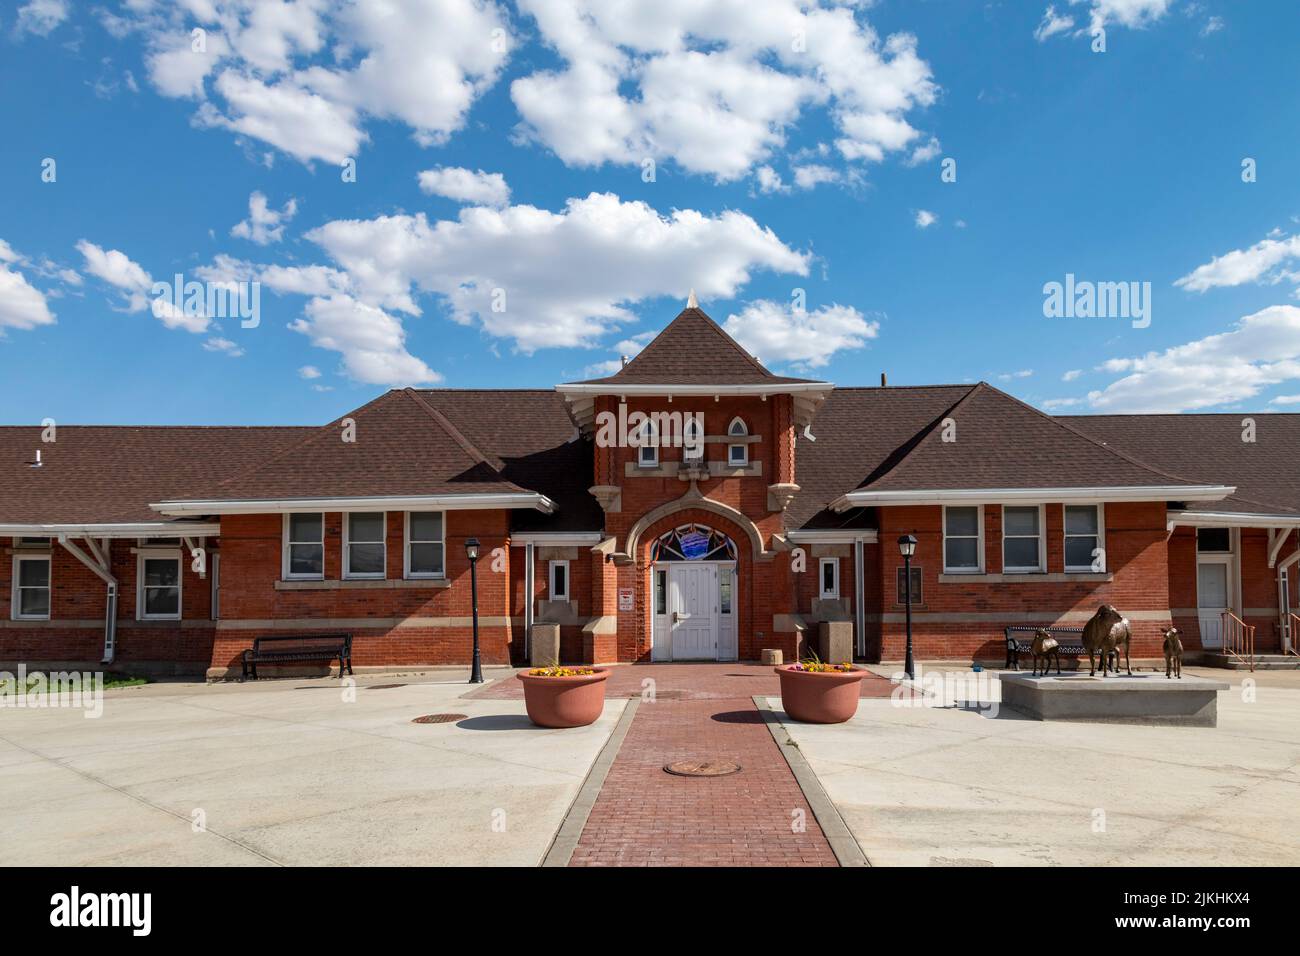 Rawlins, Wyoming - The Union Pacific Railroad Depot. Built in 1901, the depot is now used as a community center. It is on the National Register of His Stock Photo